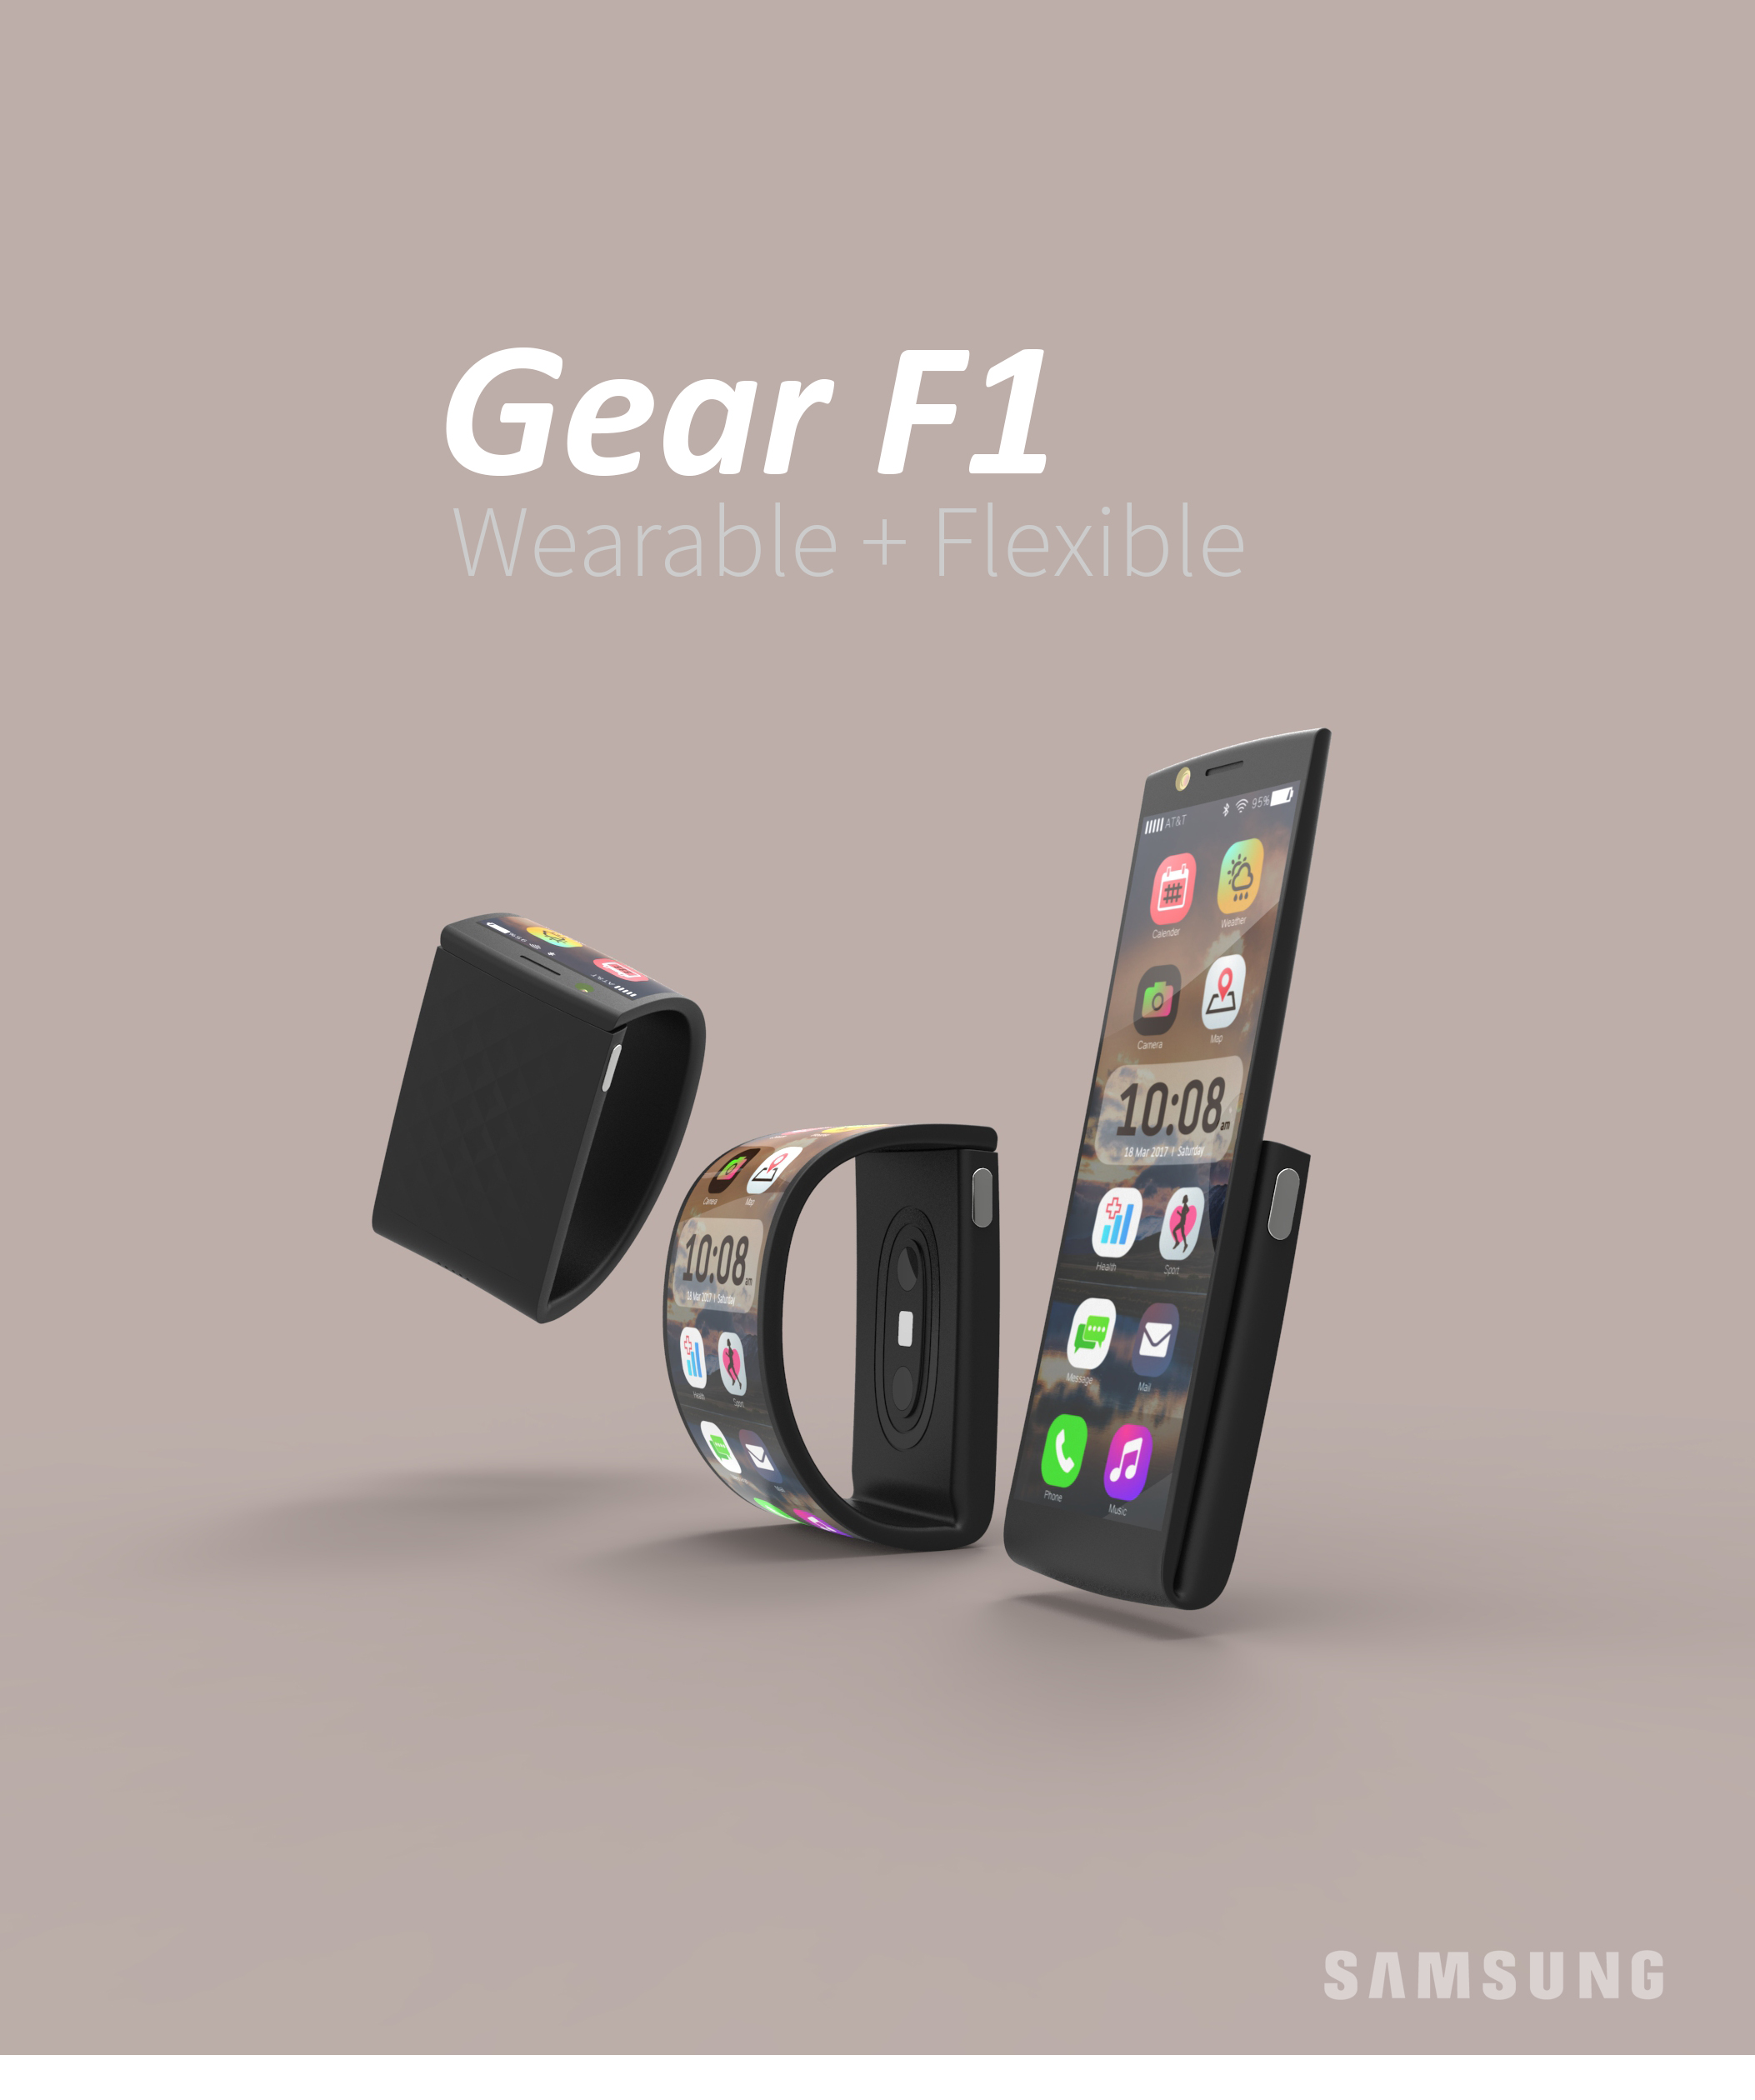 Samsung Wearable Phone with Flexible Screen